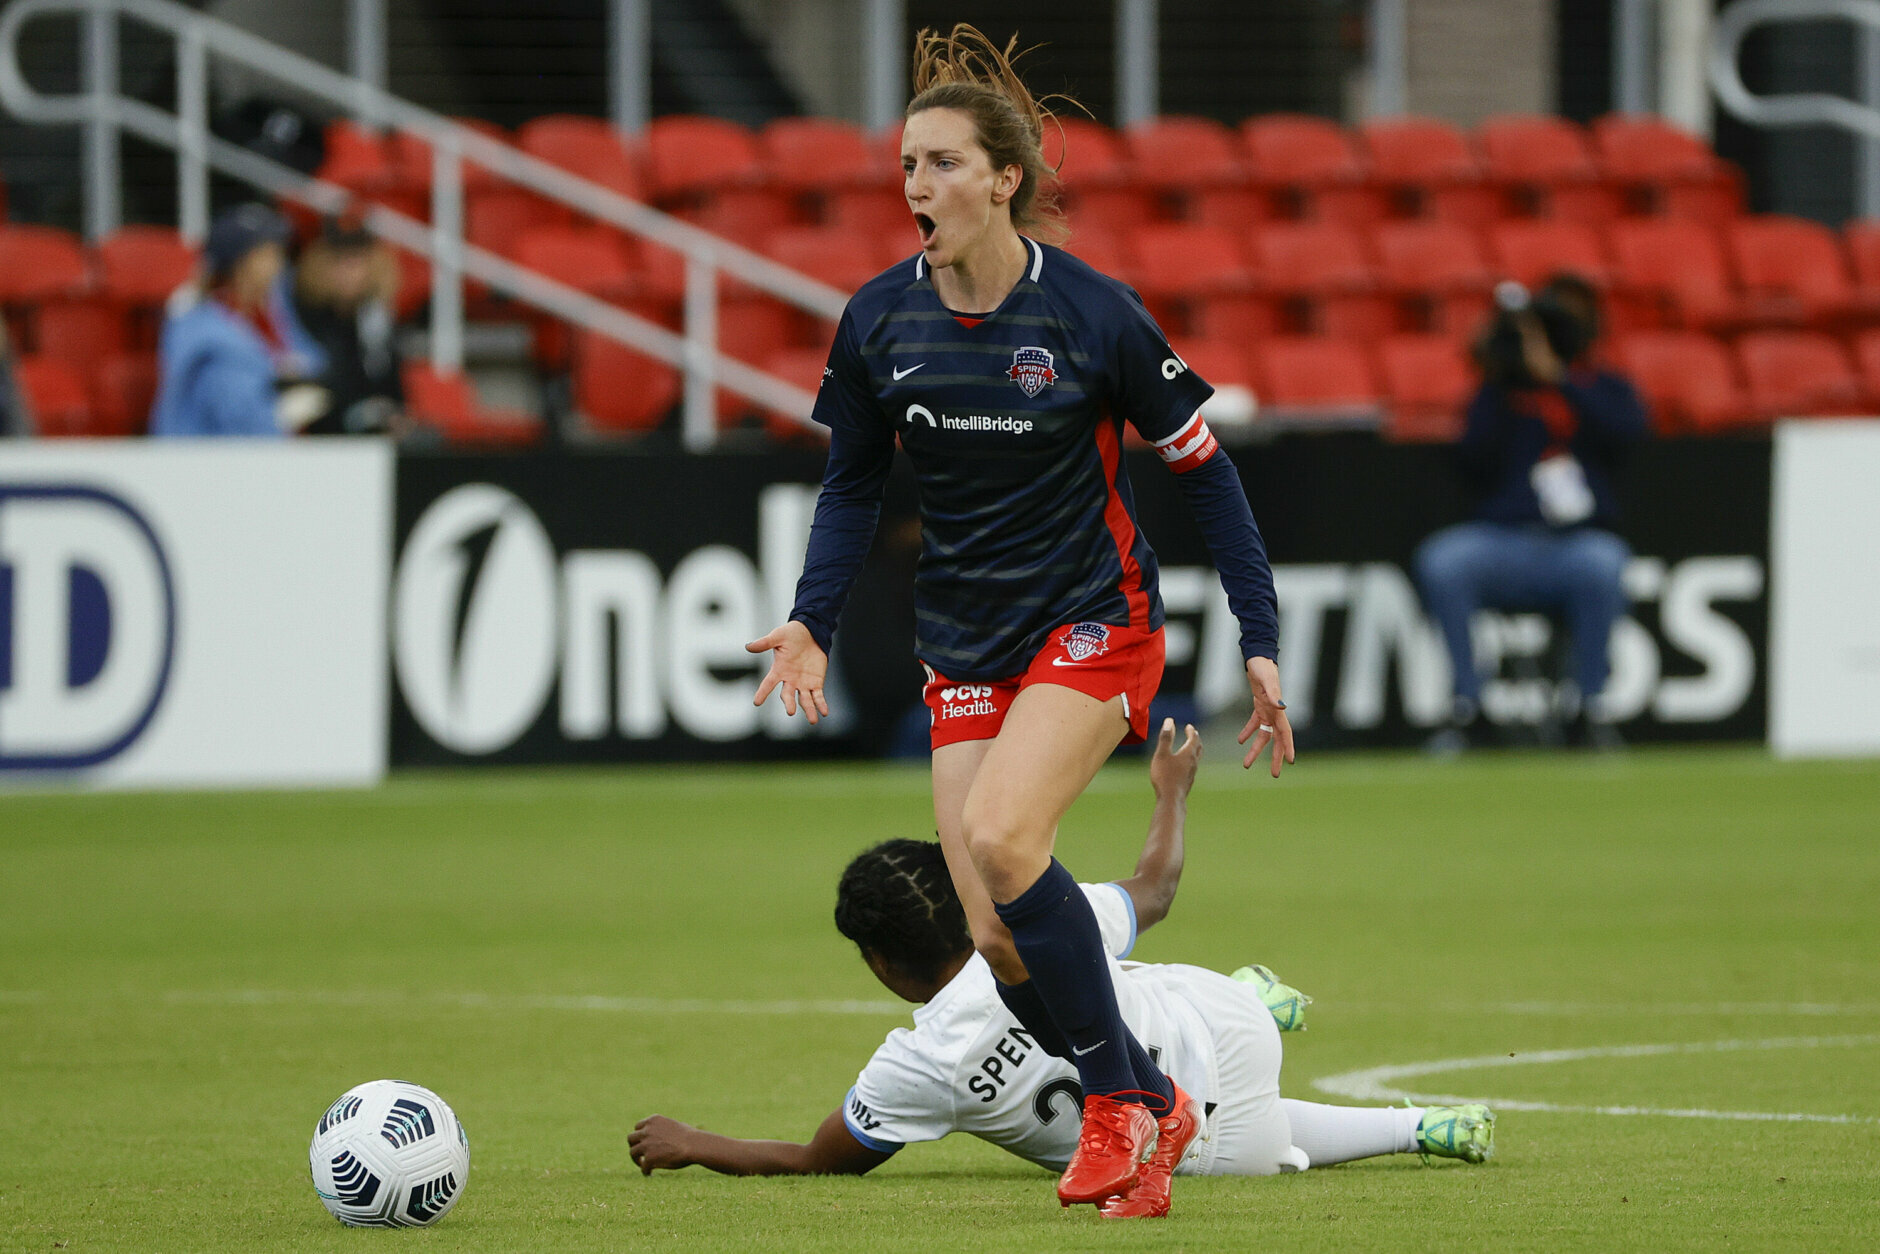 Andi Sullivan #12 of Washington Spirit reacts after fouling Jasmyne Spencer #22 of Houston Dash during the first half at Audi Field on Oct. 31, 2021 in Washington, DC. (Photo by Tim Nwachukwu/Getty Images)